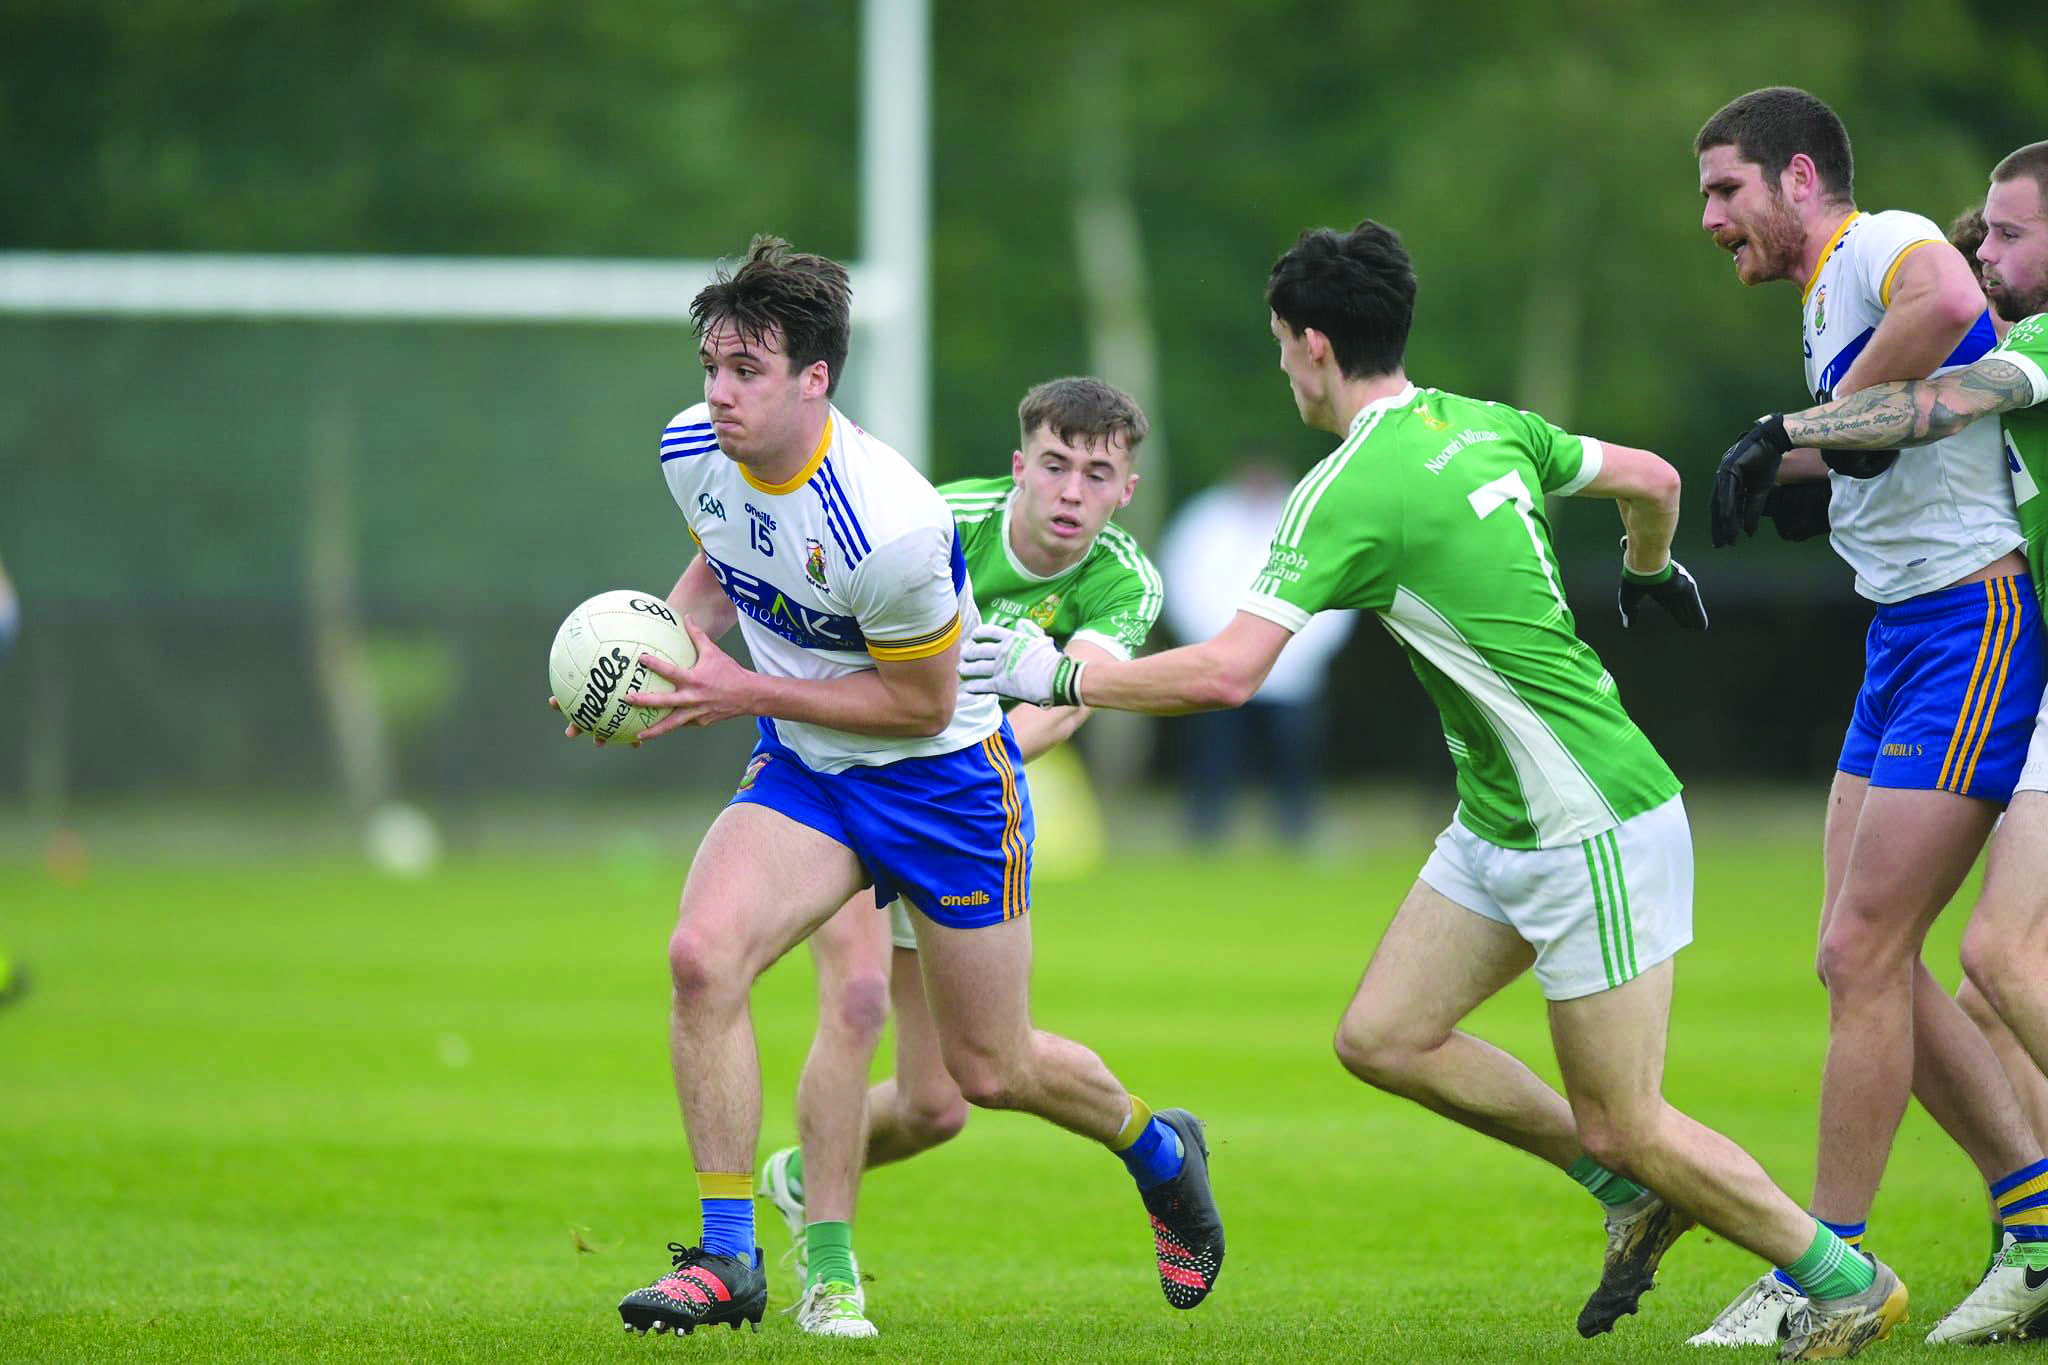 Patrick Finnegan (pictured in posession) and St Brigid’s came up short against Aghagallon in last year’s quarter-final so they will be aiming for a happier outcome when the sides meet again on Sunday at Hannahstown